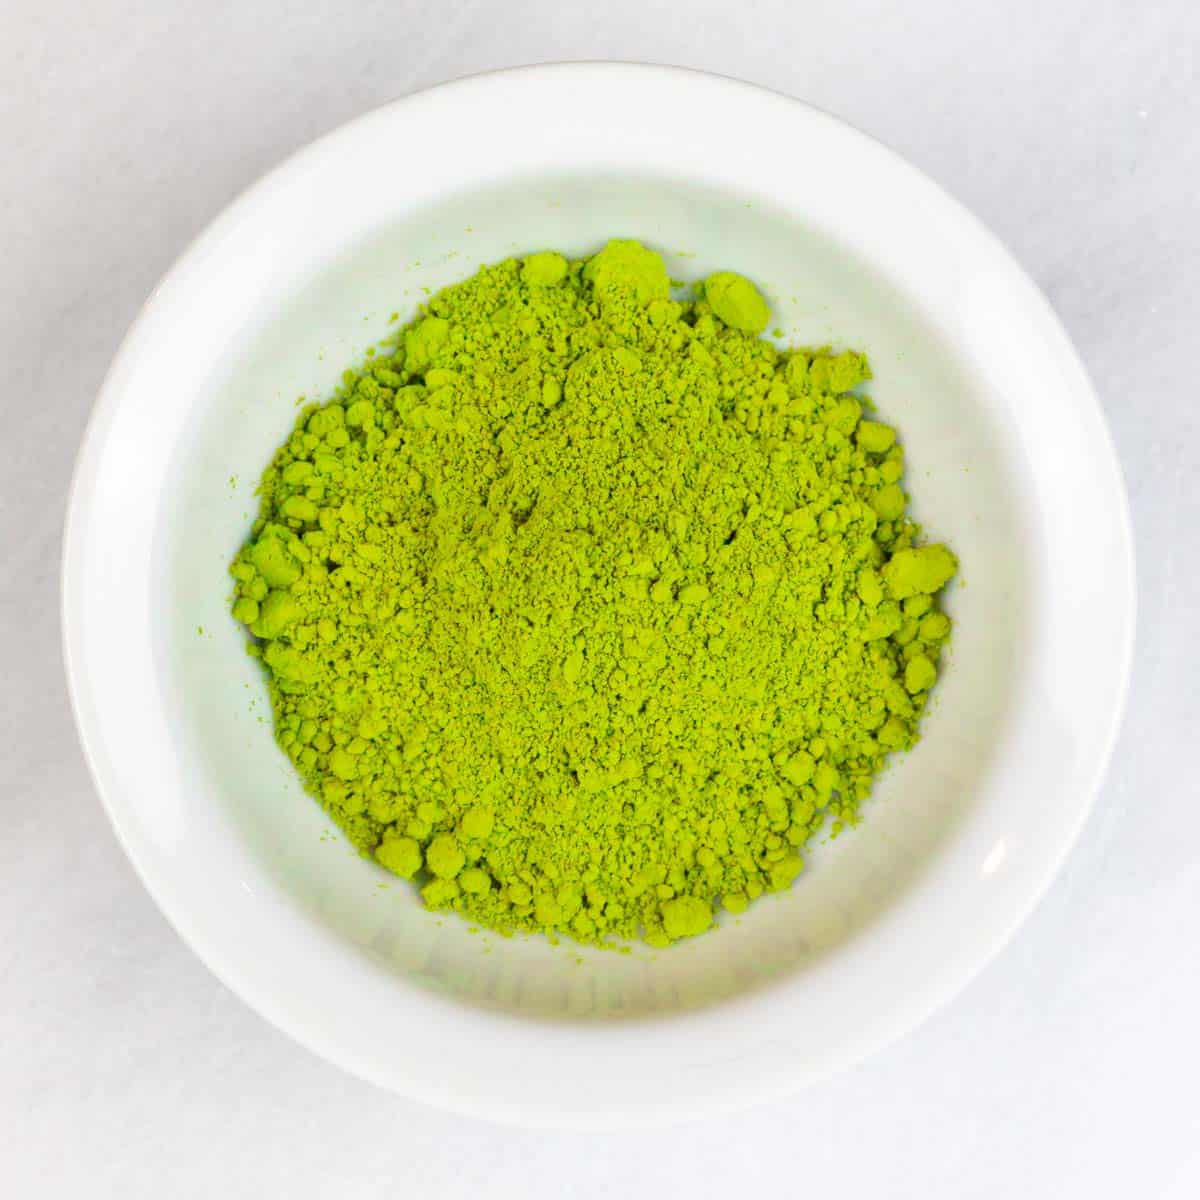 Small white bowl on a white marble board filled with bright green matcha powder.